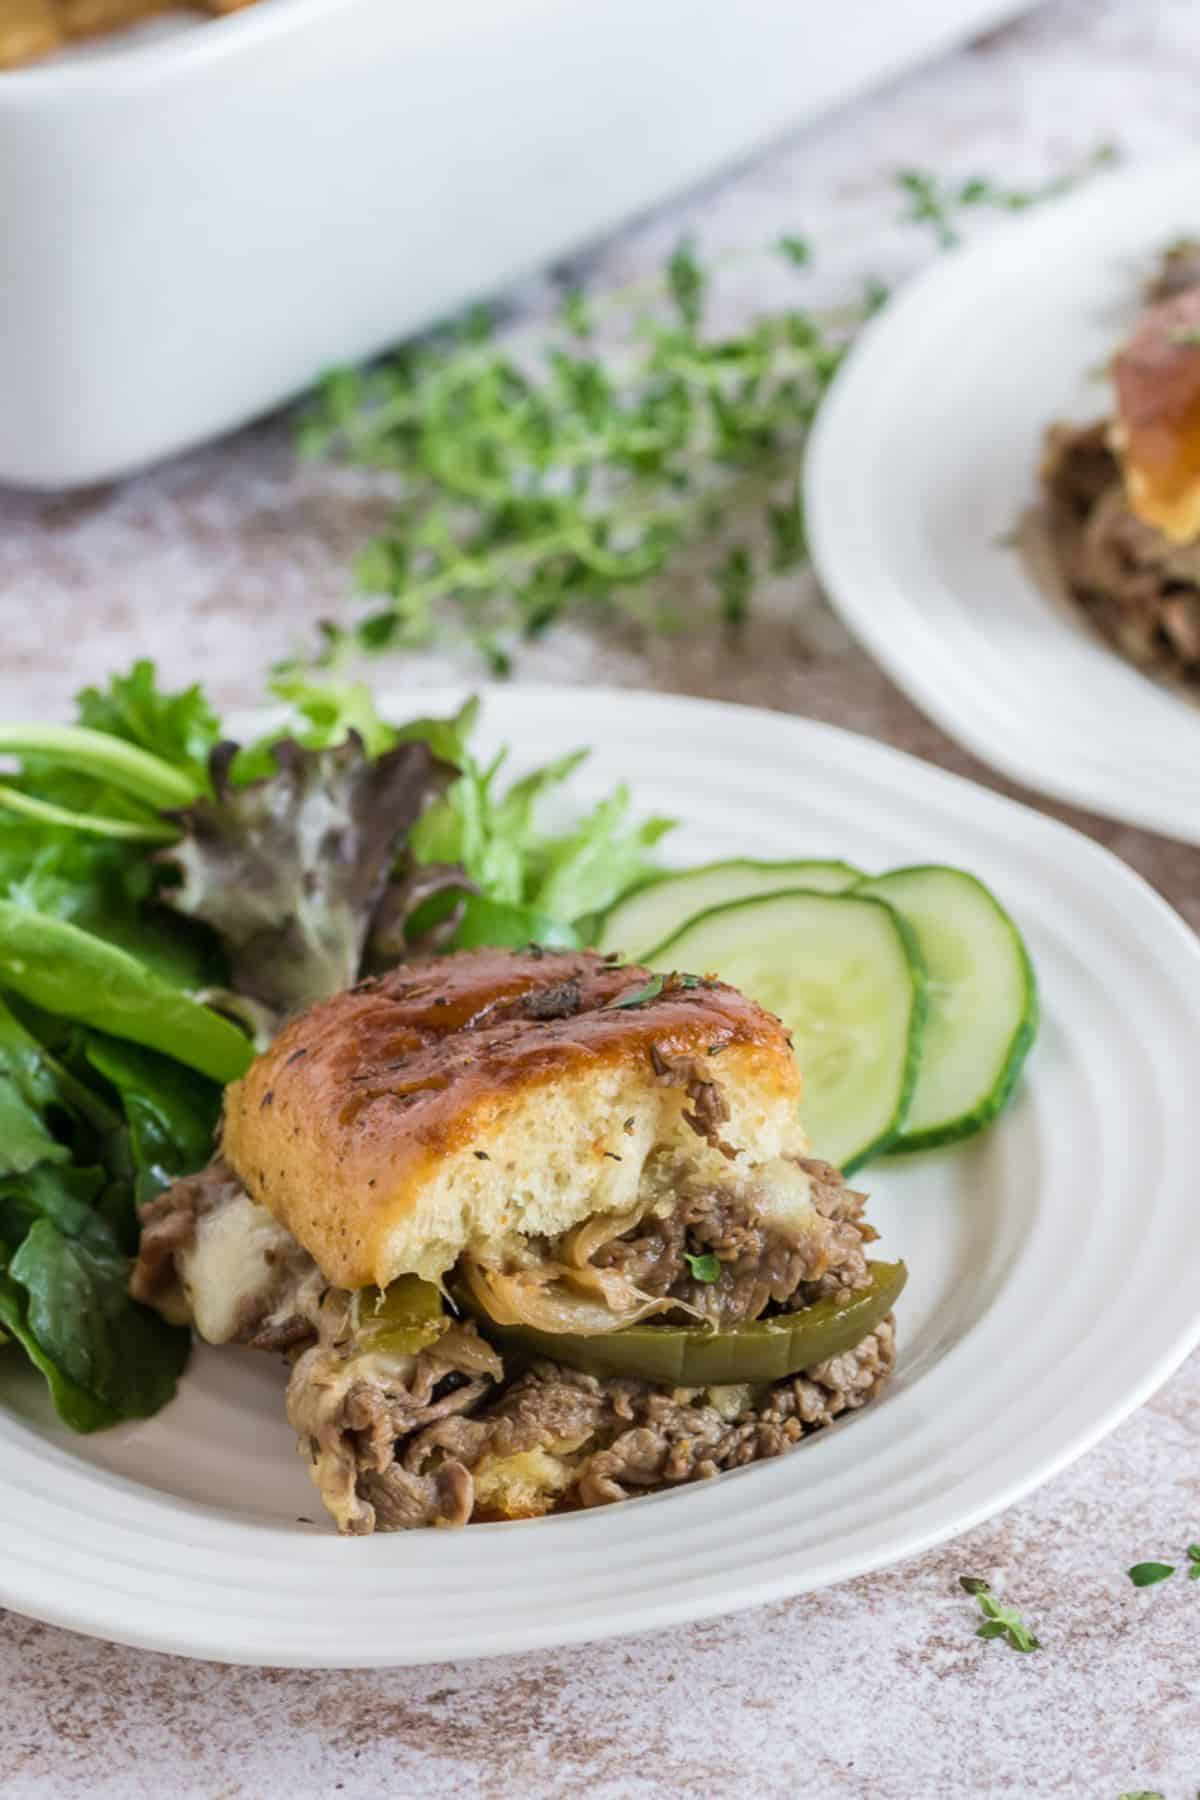 Philly Cheesesteak Sliders with slider on plate and salad and cucumbers.